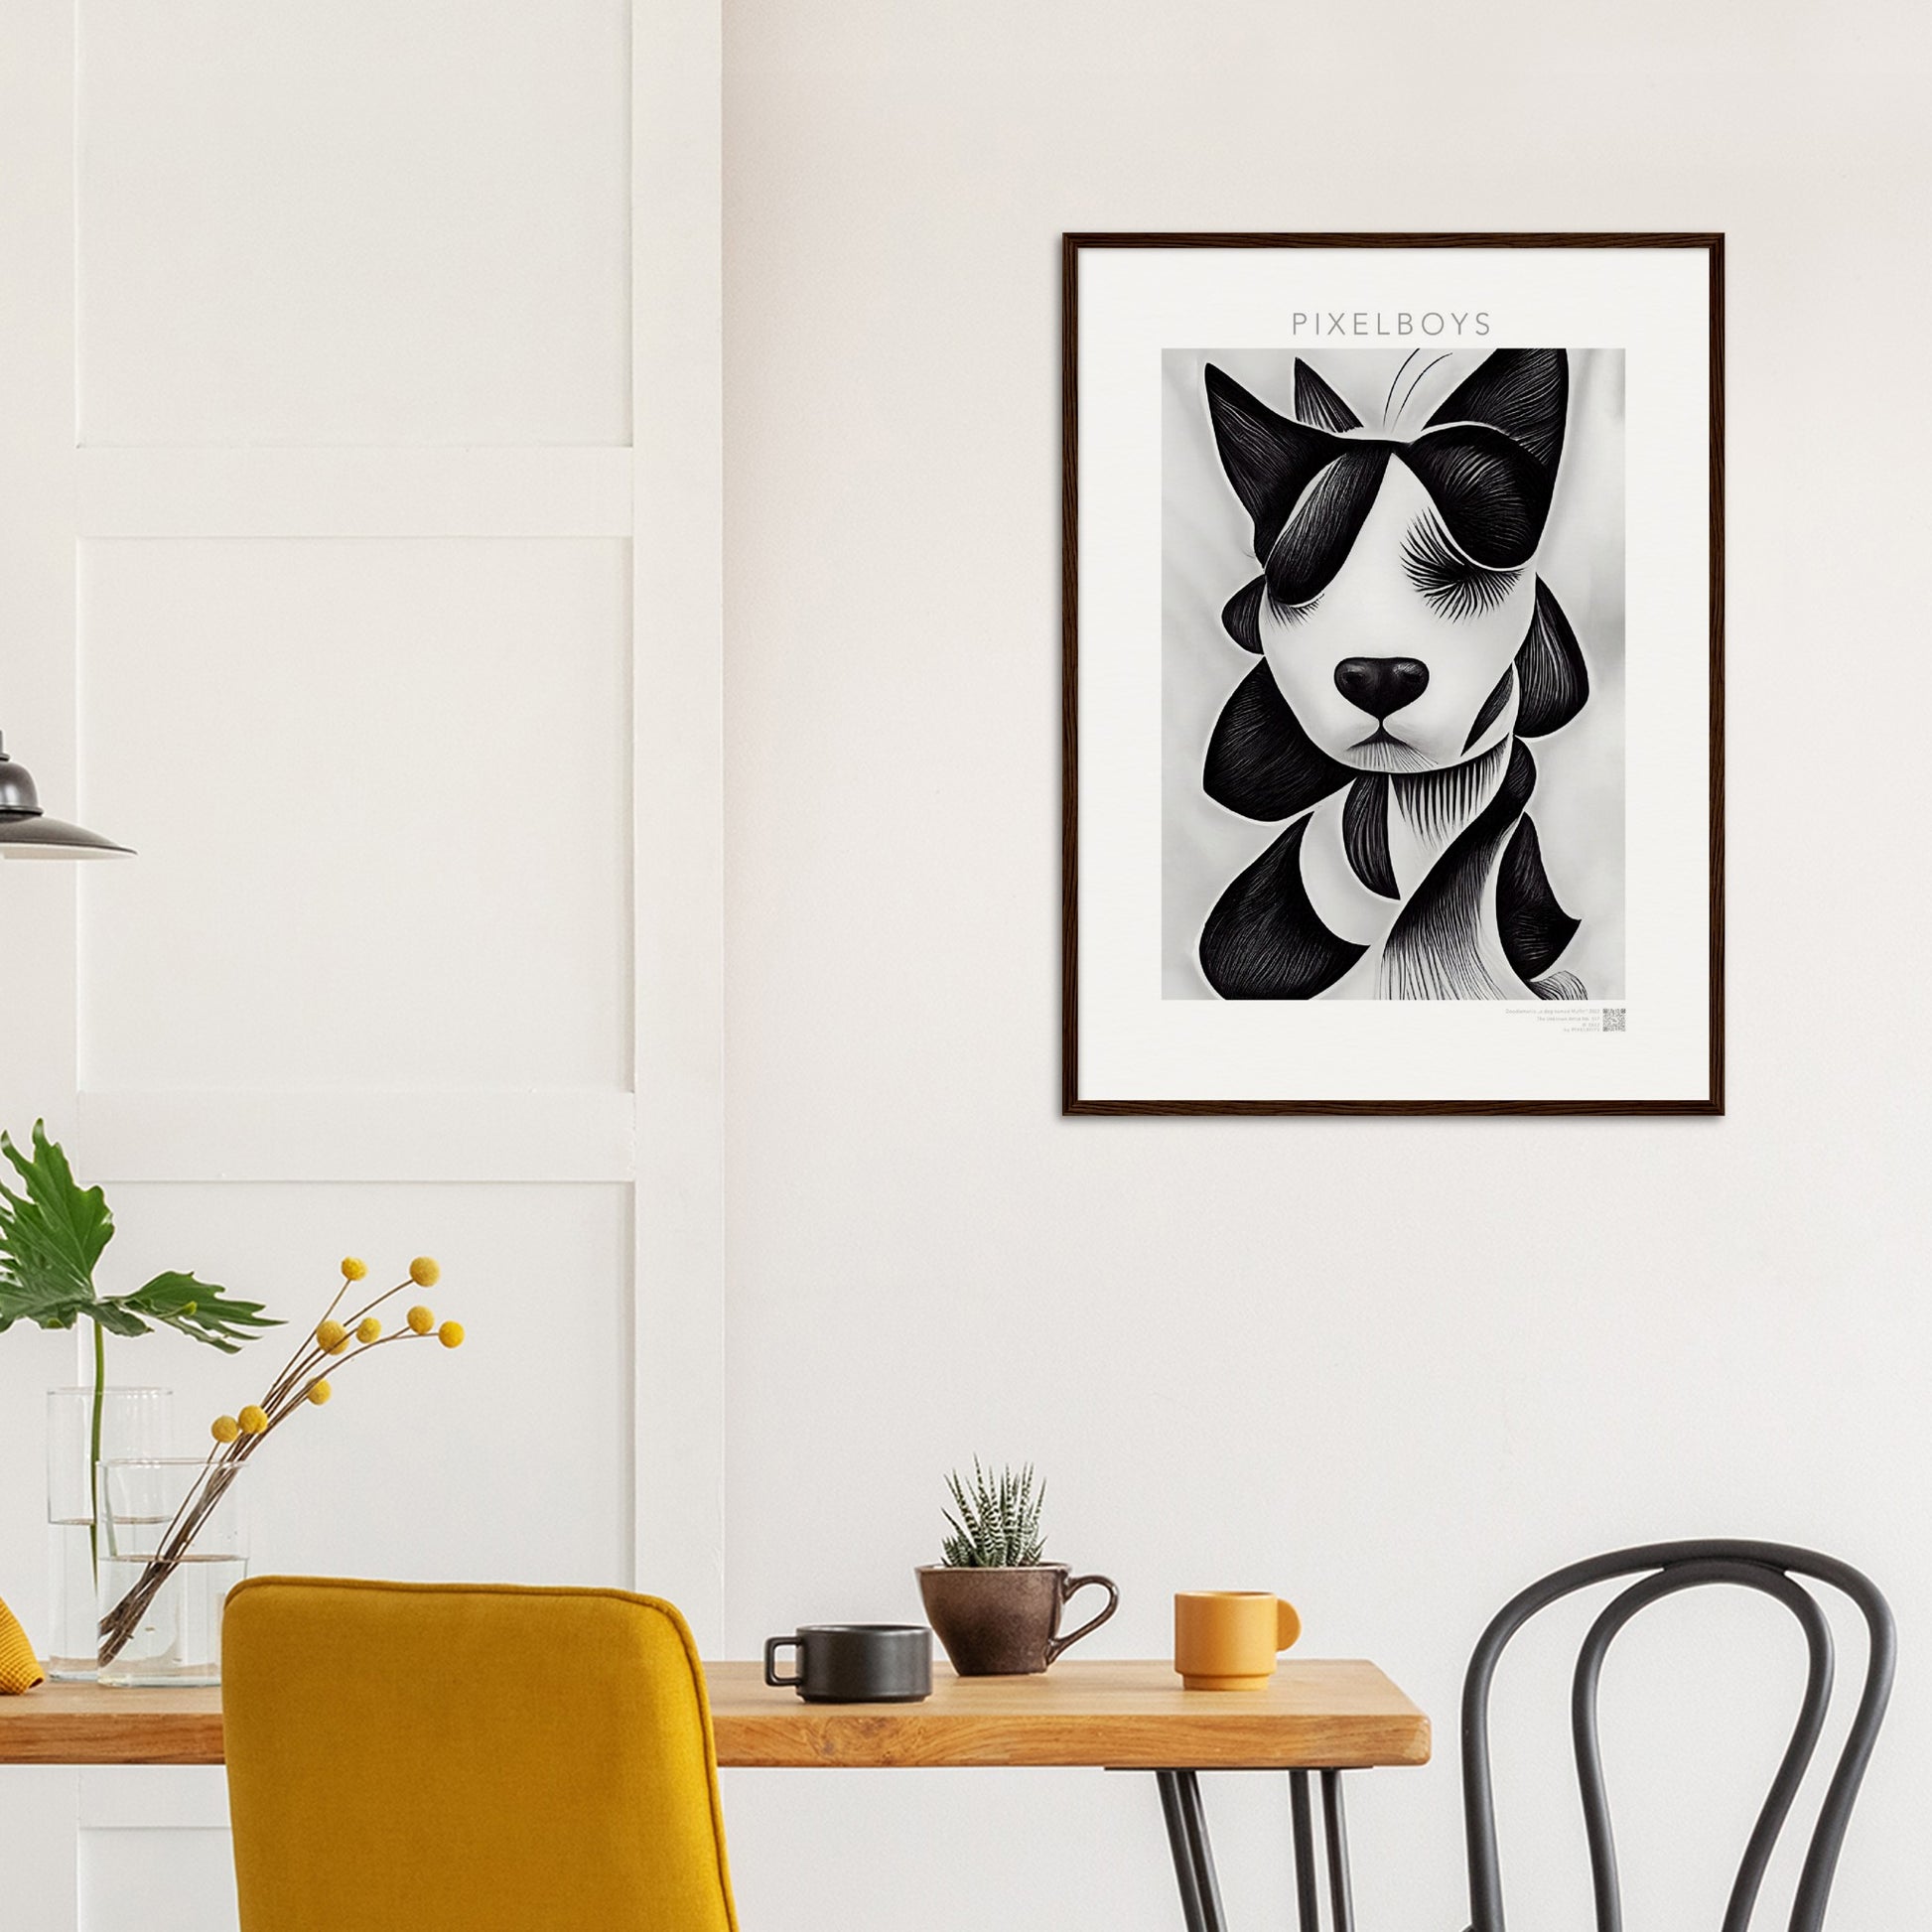 Poster mit Rahmen (Holz) - in Museumsqualität - Doodlemania "a dog named Muffin"- No.4 - Wandbild - doodle mania art collection - wall art - Hunde - Doodle Kunst - dogs- doodle posters and art prints - Poster mit Rahmen - doodle artwork - Acrylbild - Kunstdruck - Wandbild - office Poster - Poster with frame -  Künstler: Pixelboys & The Unknown Artist Nb.517 - keith haring - Gastro Art - anti stress art - Art Brand - Kunstdruck -